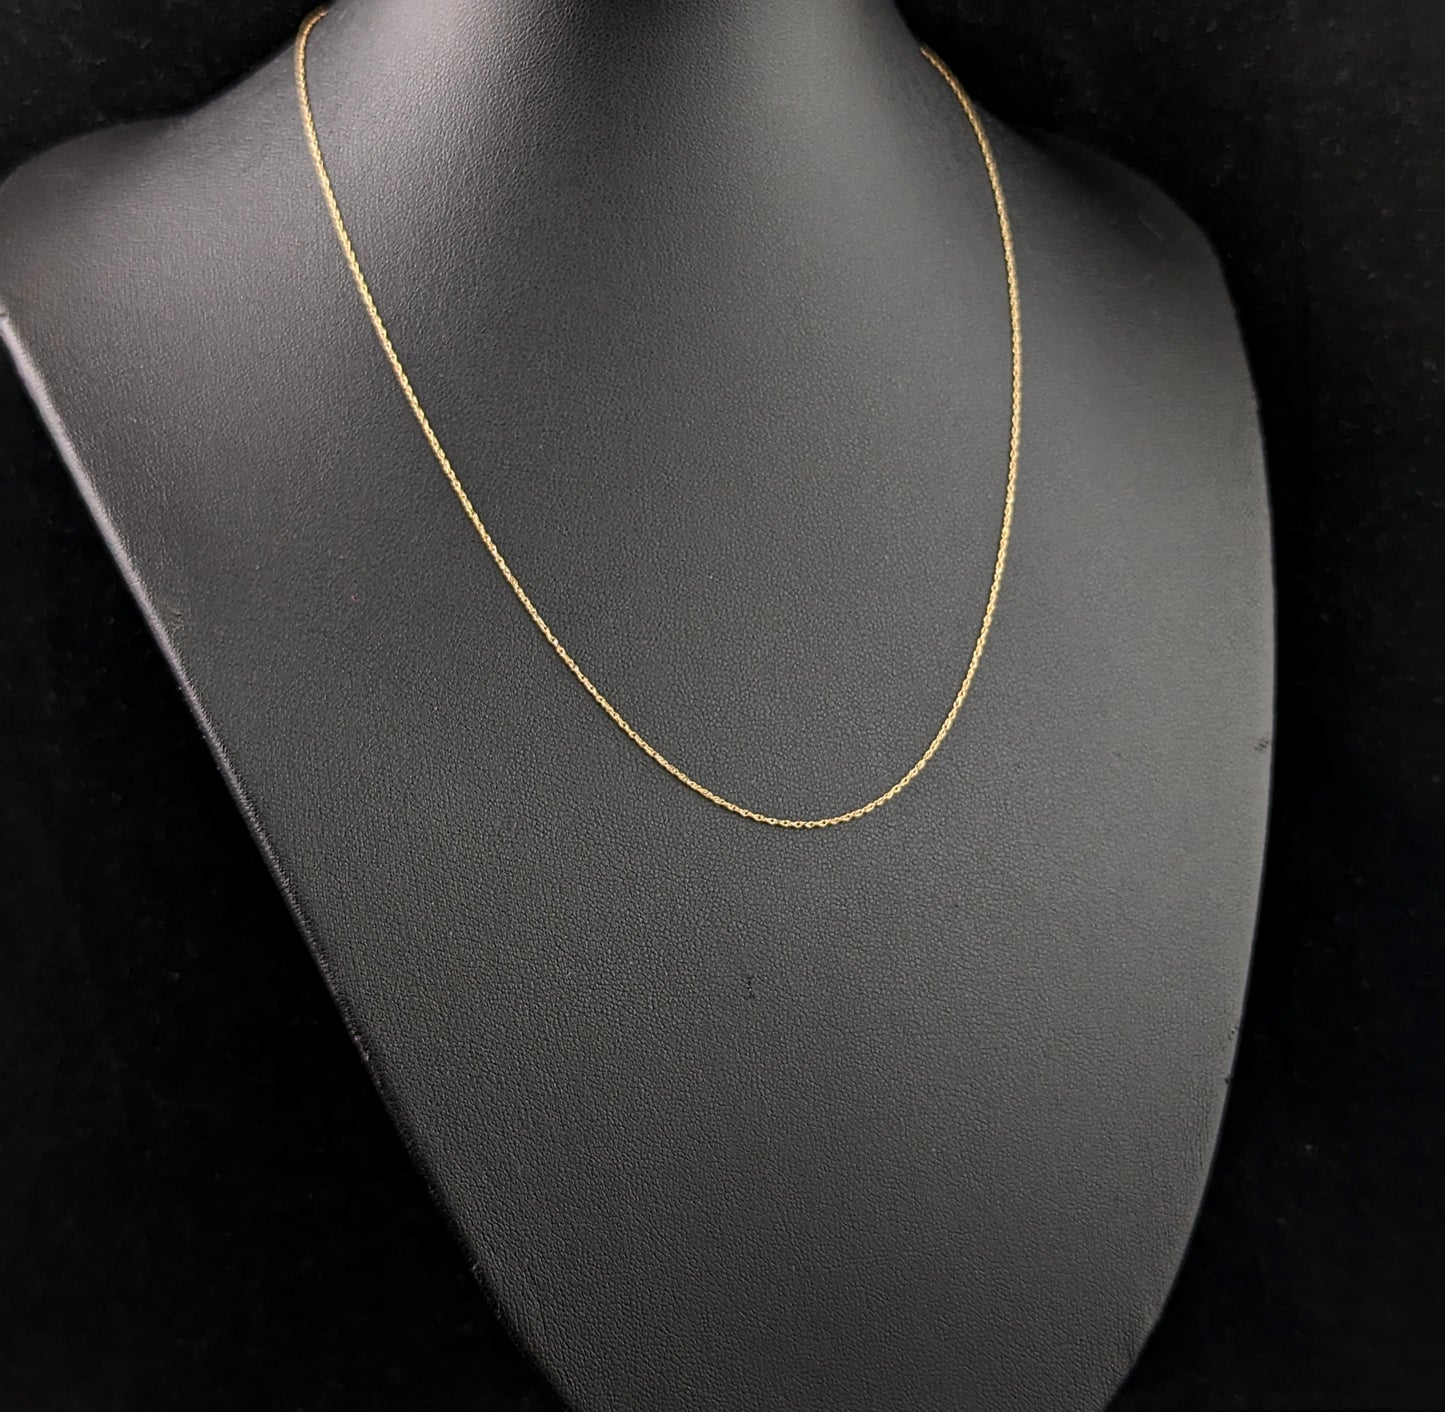 Vintage 9ct gold trace link chain necklace, dainty